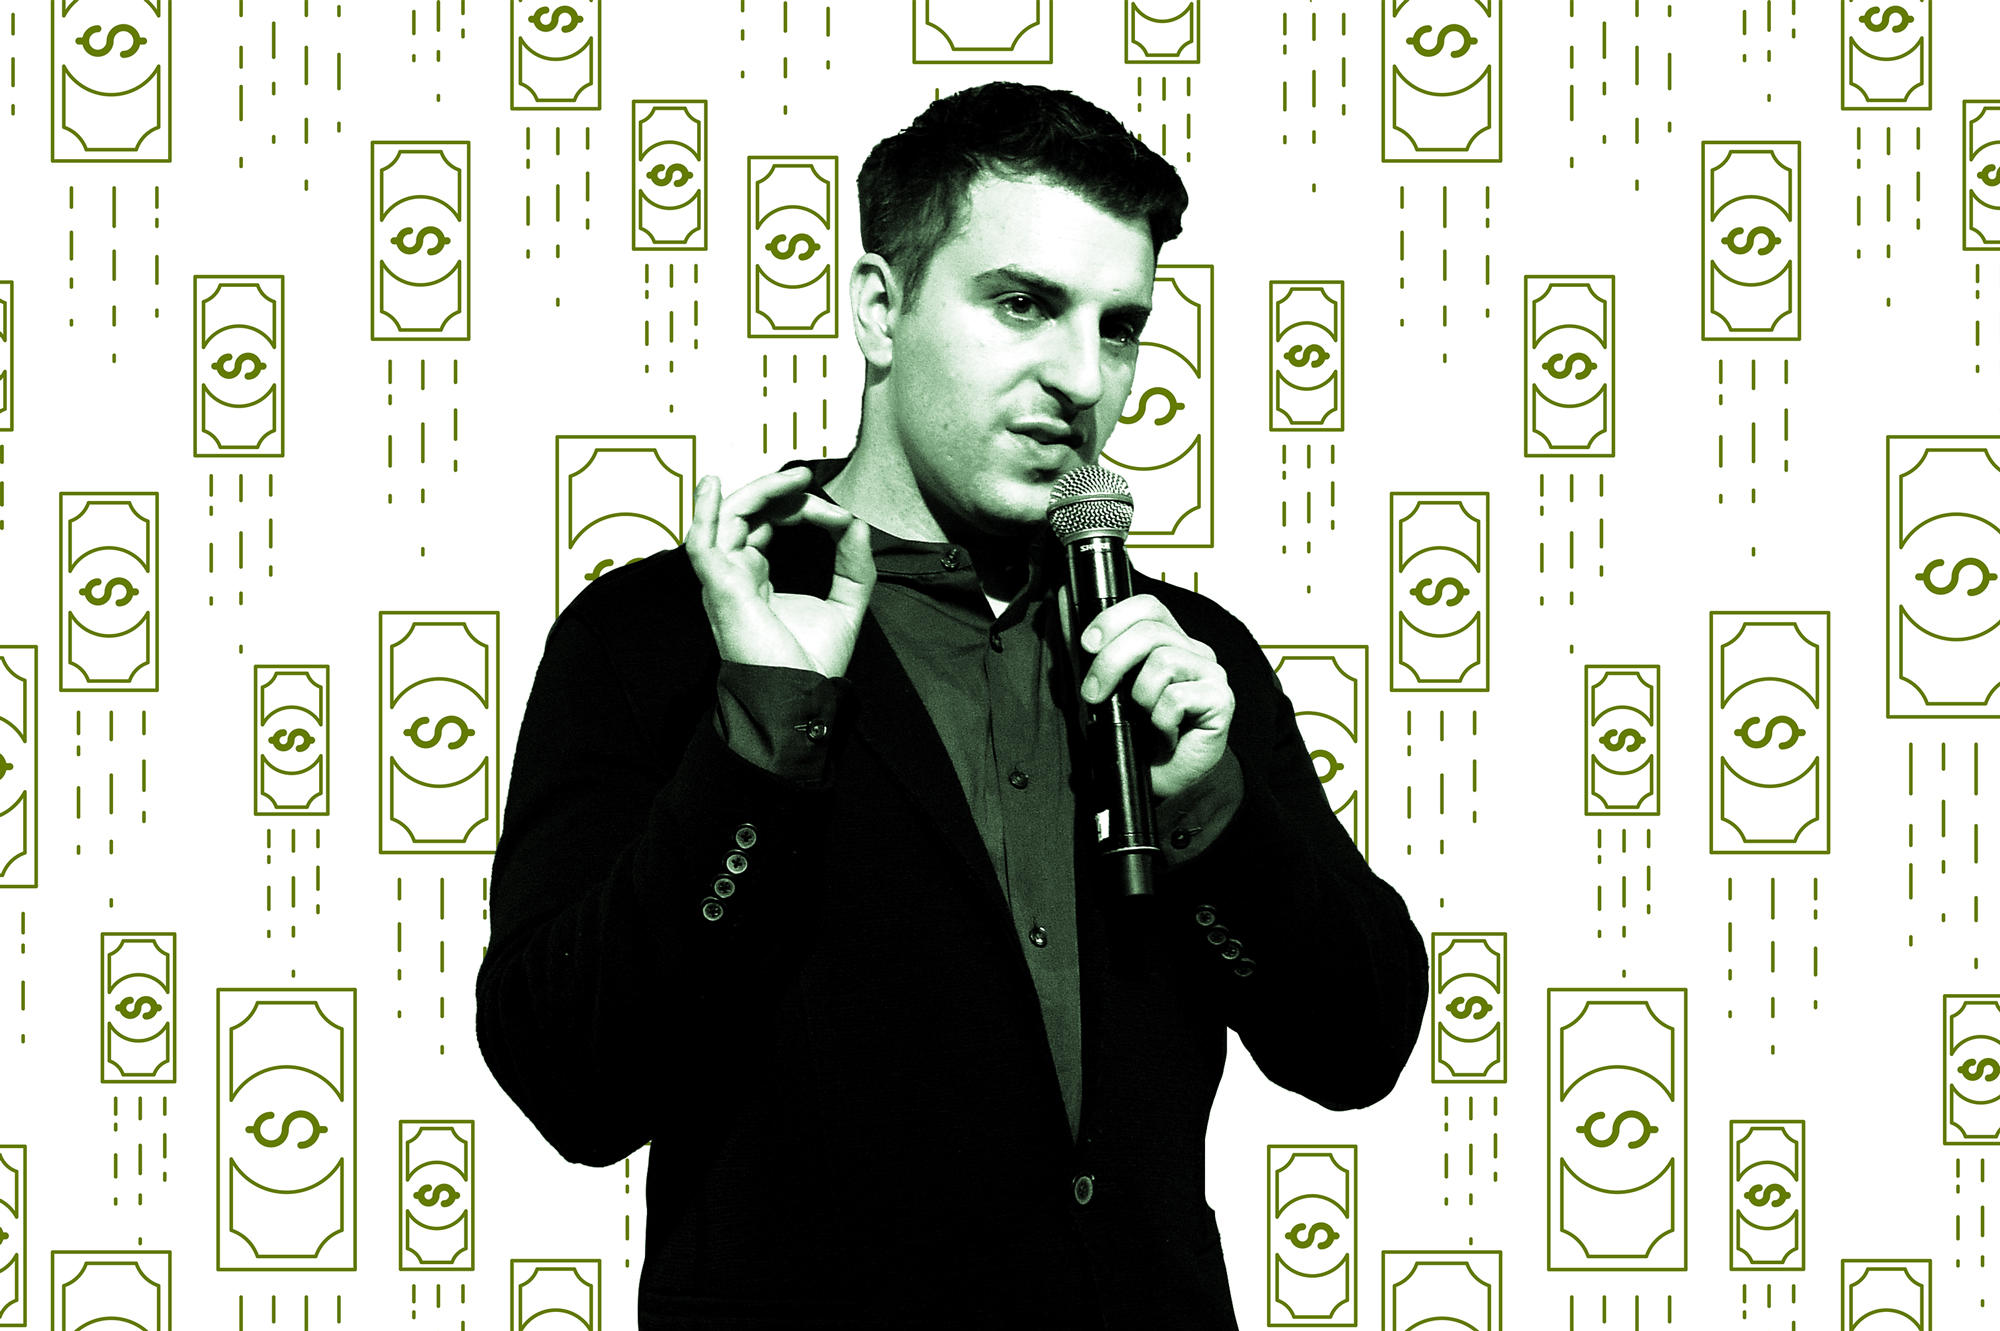 Airbnb CEO Brian Chesky (Chesky by Bryan Bedder/Getty Images for Airbnb)